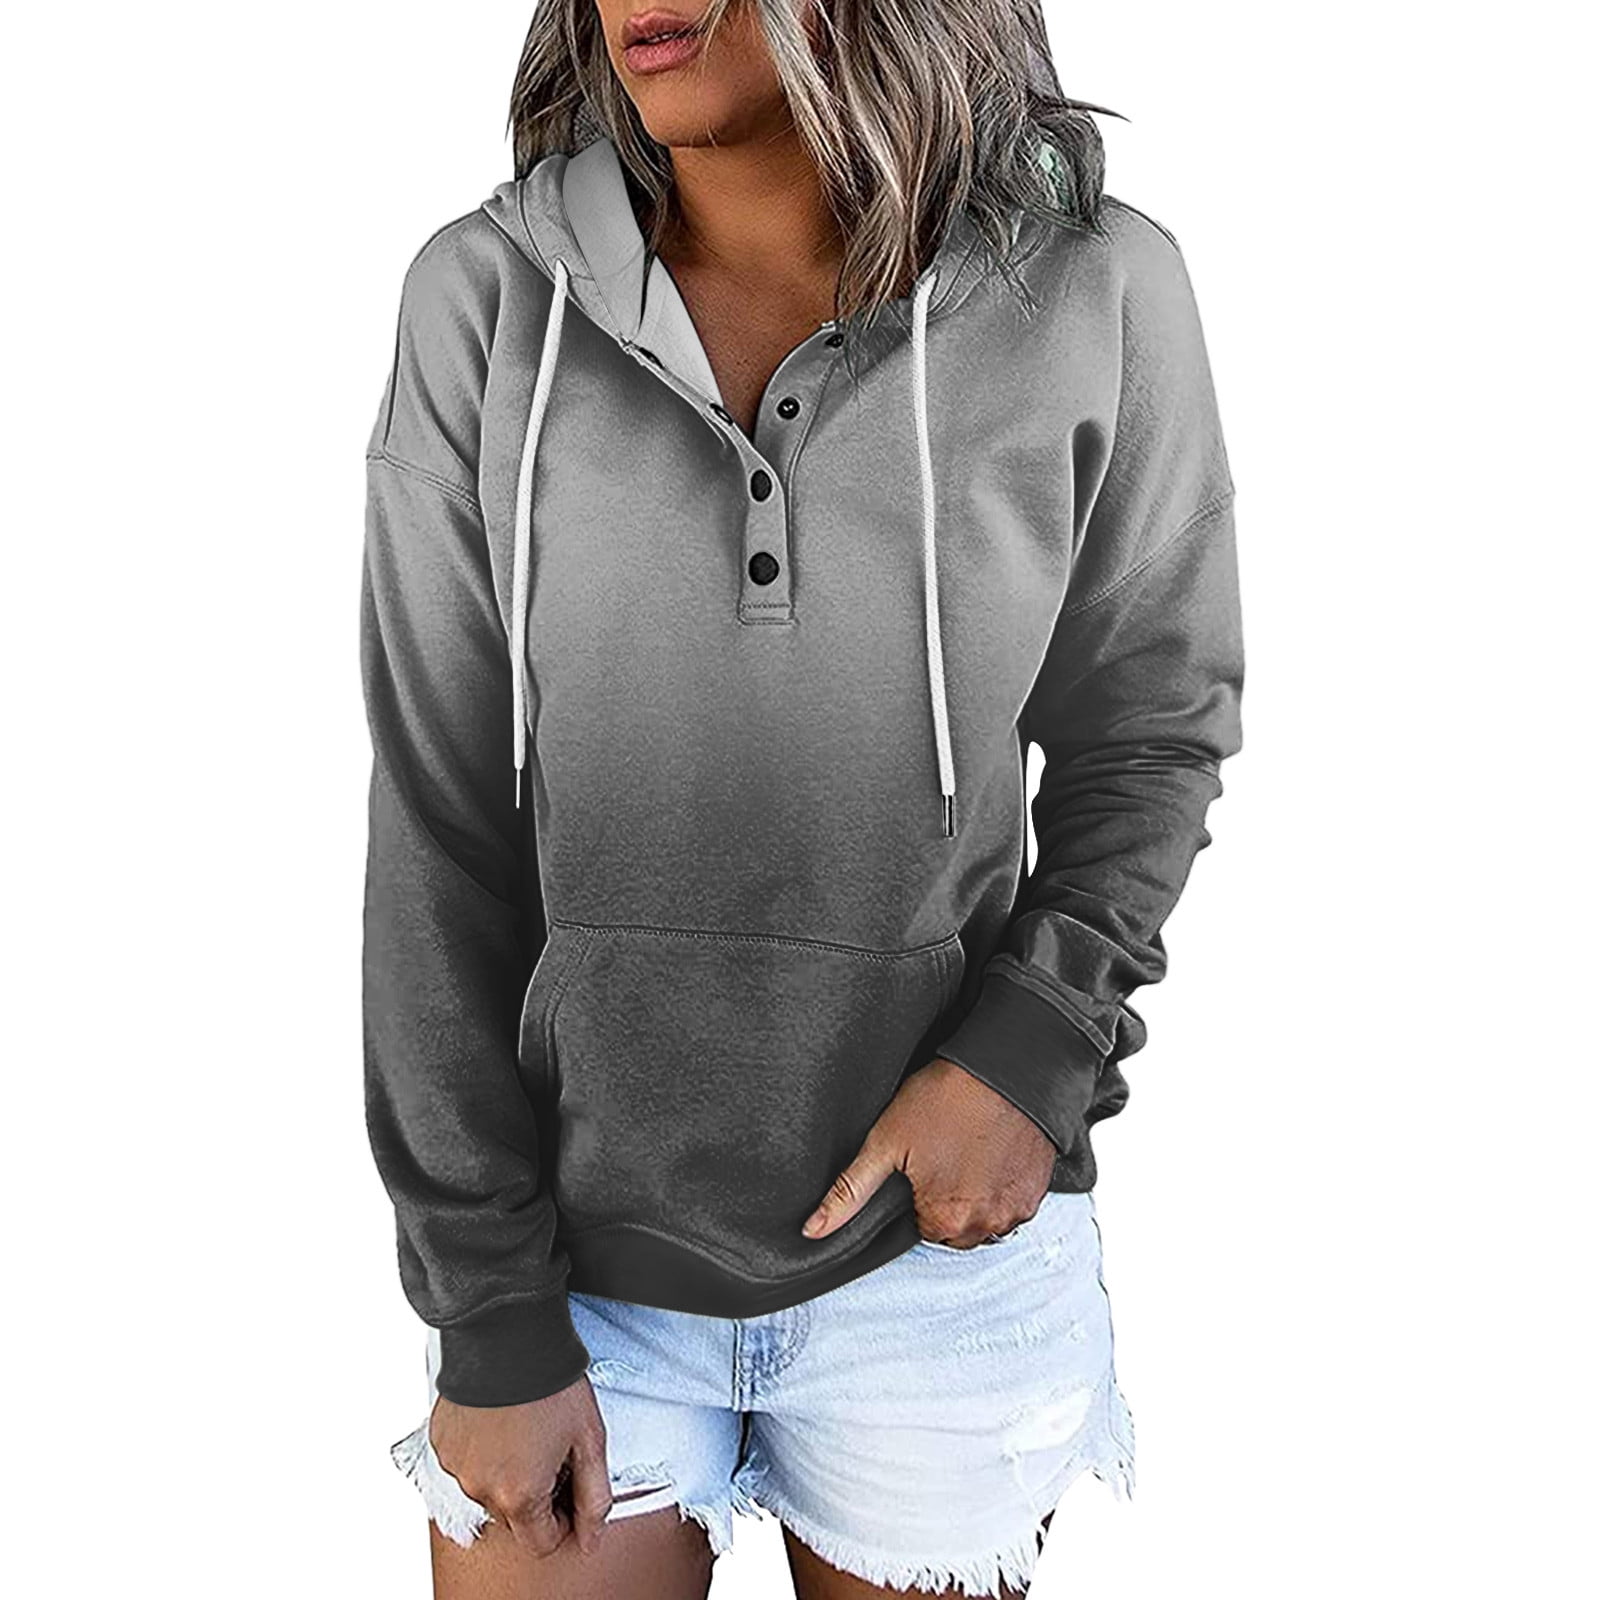 RQYYD Women's Casual Gradient Hoodies Long Sleeve Sweatshirt Fall Drawstring  Pullover Button Up Tops with Pocket (Black,XXL) 